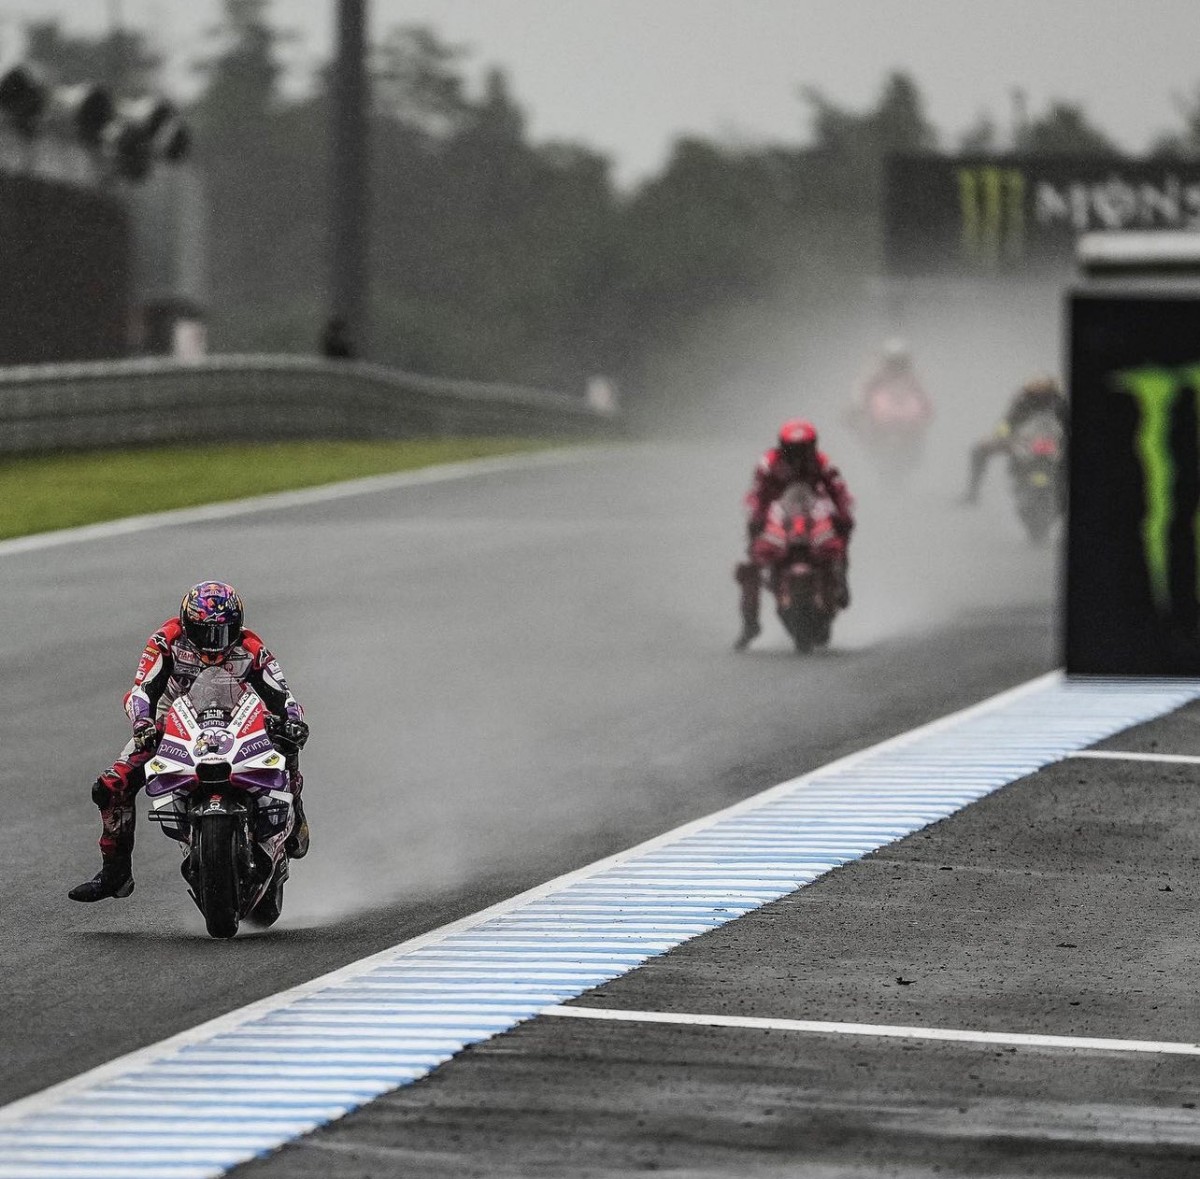 Heavy Rain at Motegi won by Jorge Martin who was leading when the red flag waved.